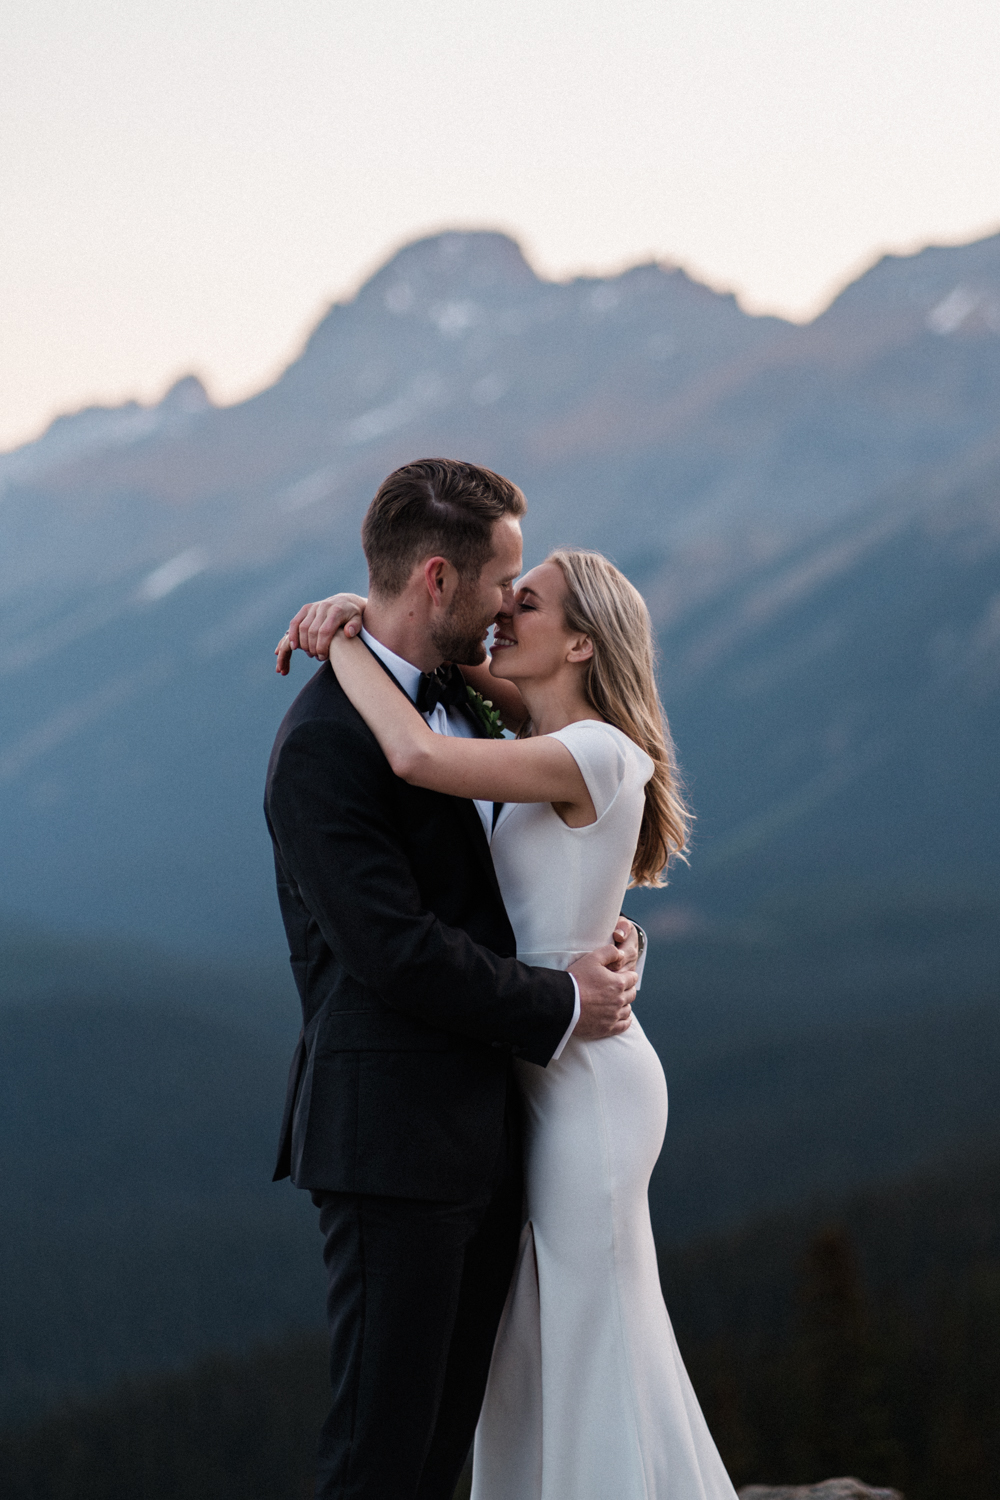 Bride and groom embrace infront of mountains as the sun comes up 